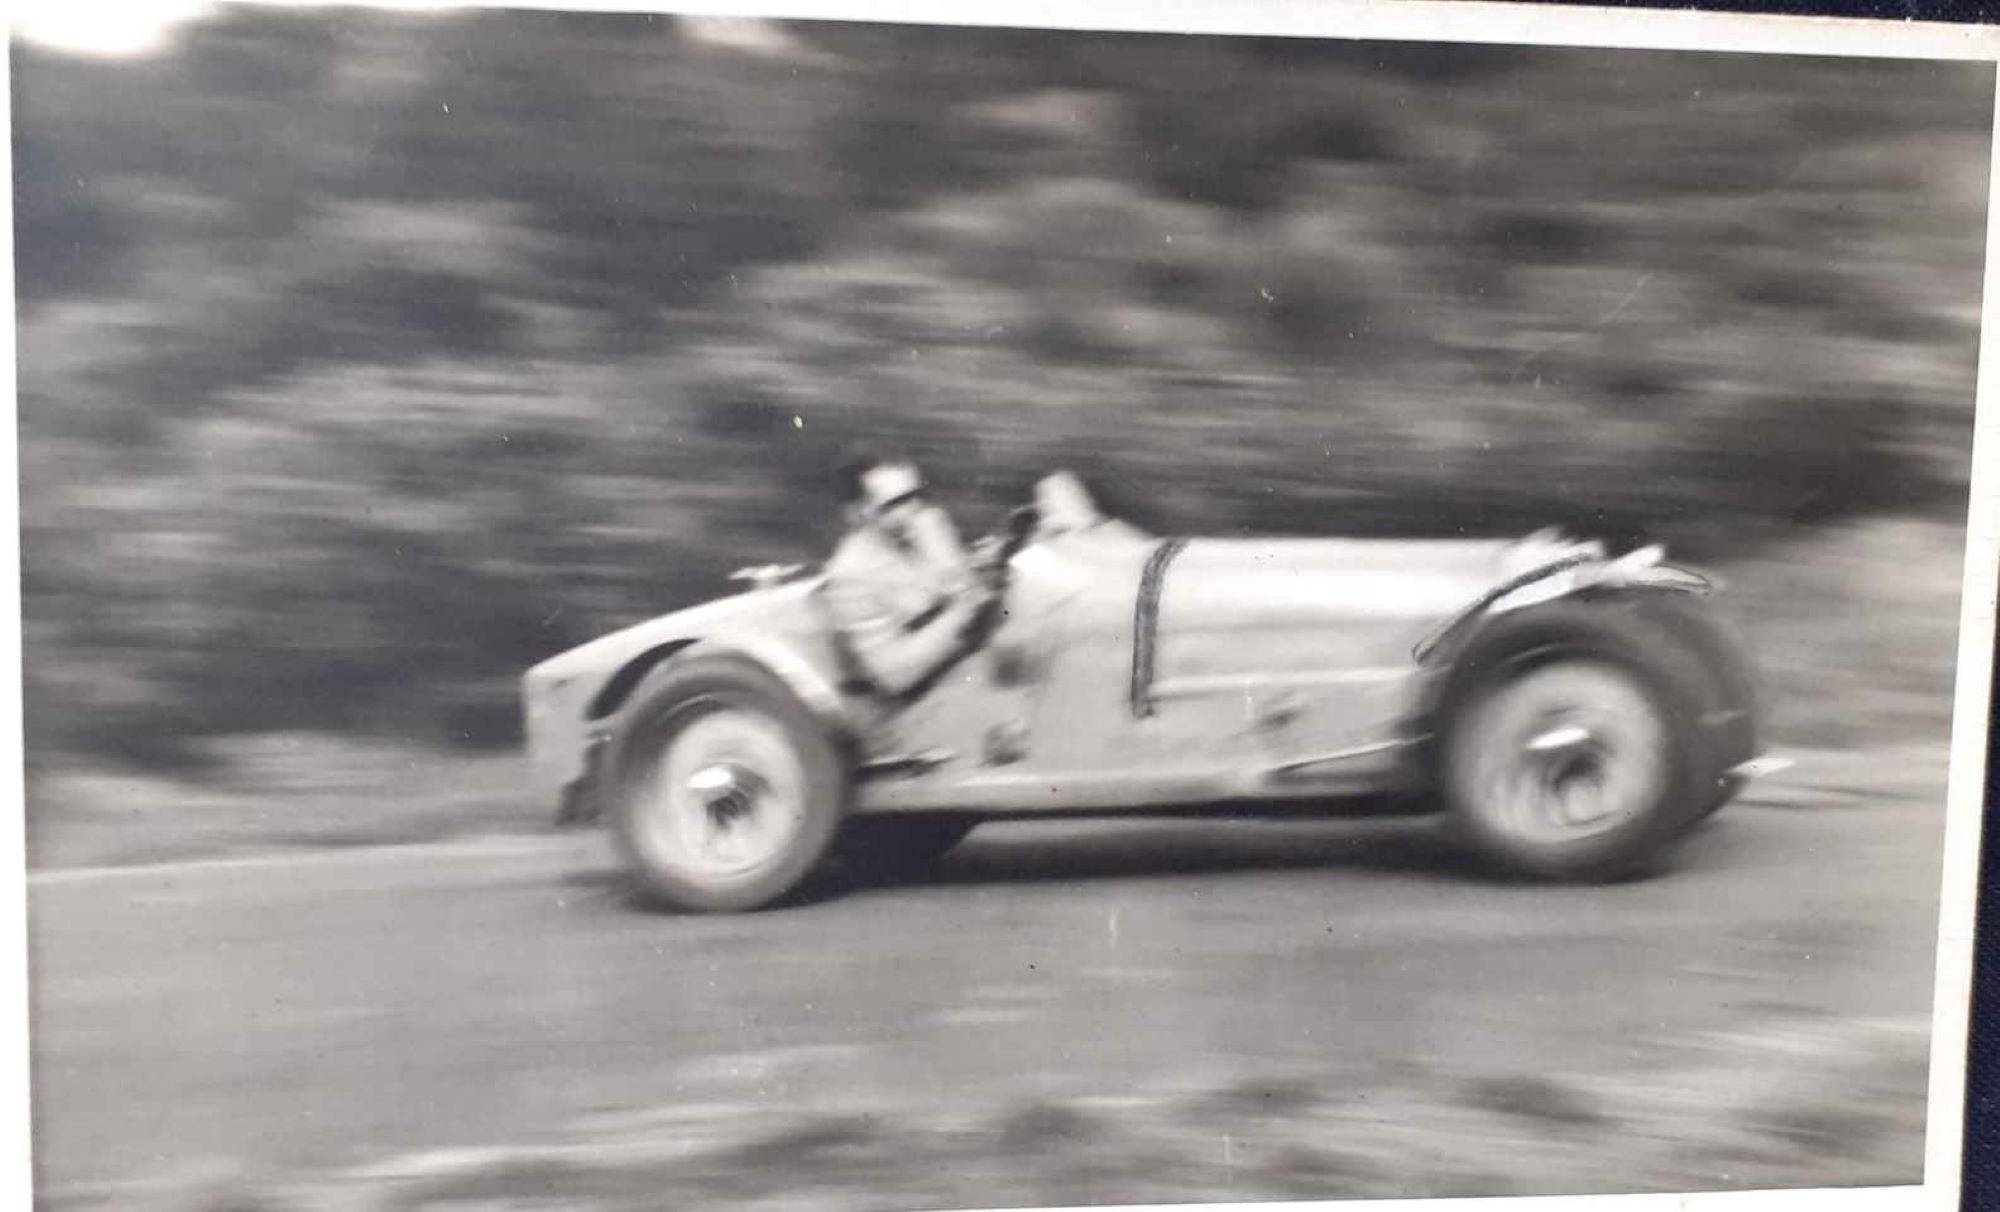 Name:  NSCC 1950 #0116 Bugatti T35 at speed - light colour 1950's - image Graeme Wells arch Anthony Wel.jpg
Views: 201
Size:  158.1 KB